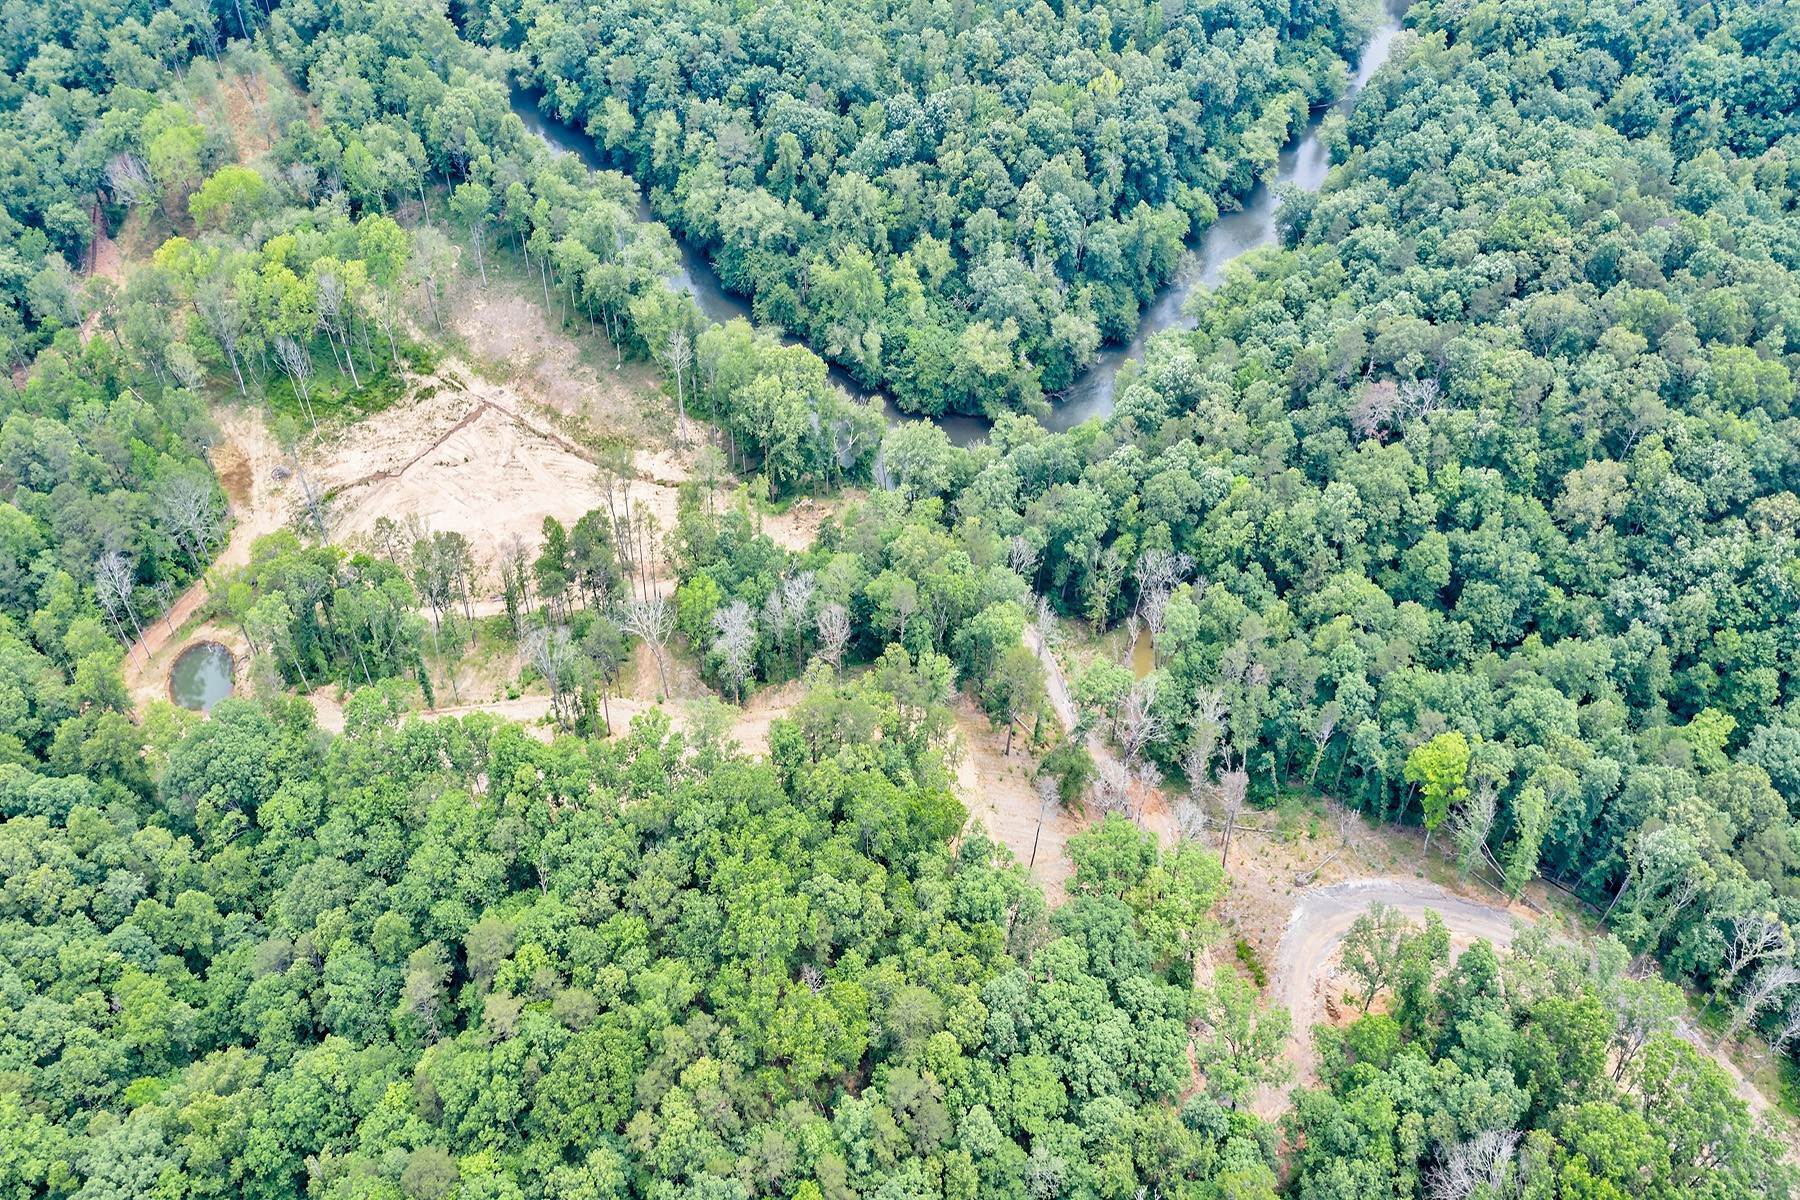 14. Land for Sale at Gorgeous Etowah River Frontage And 25,000 Acre Dawson Forest Access 0 Etowah Overlook Road Dawsonville, Georgia 30534 United States